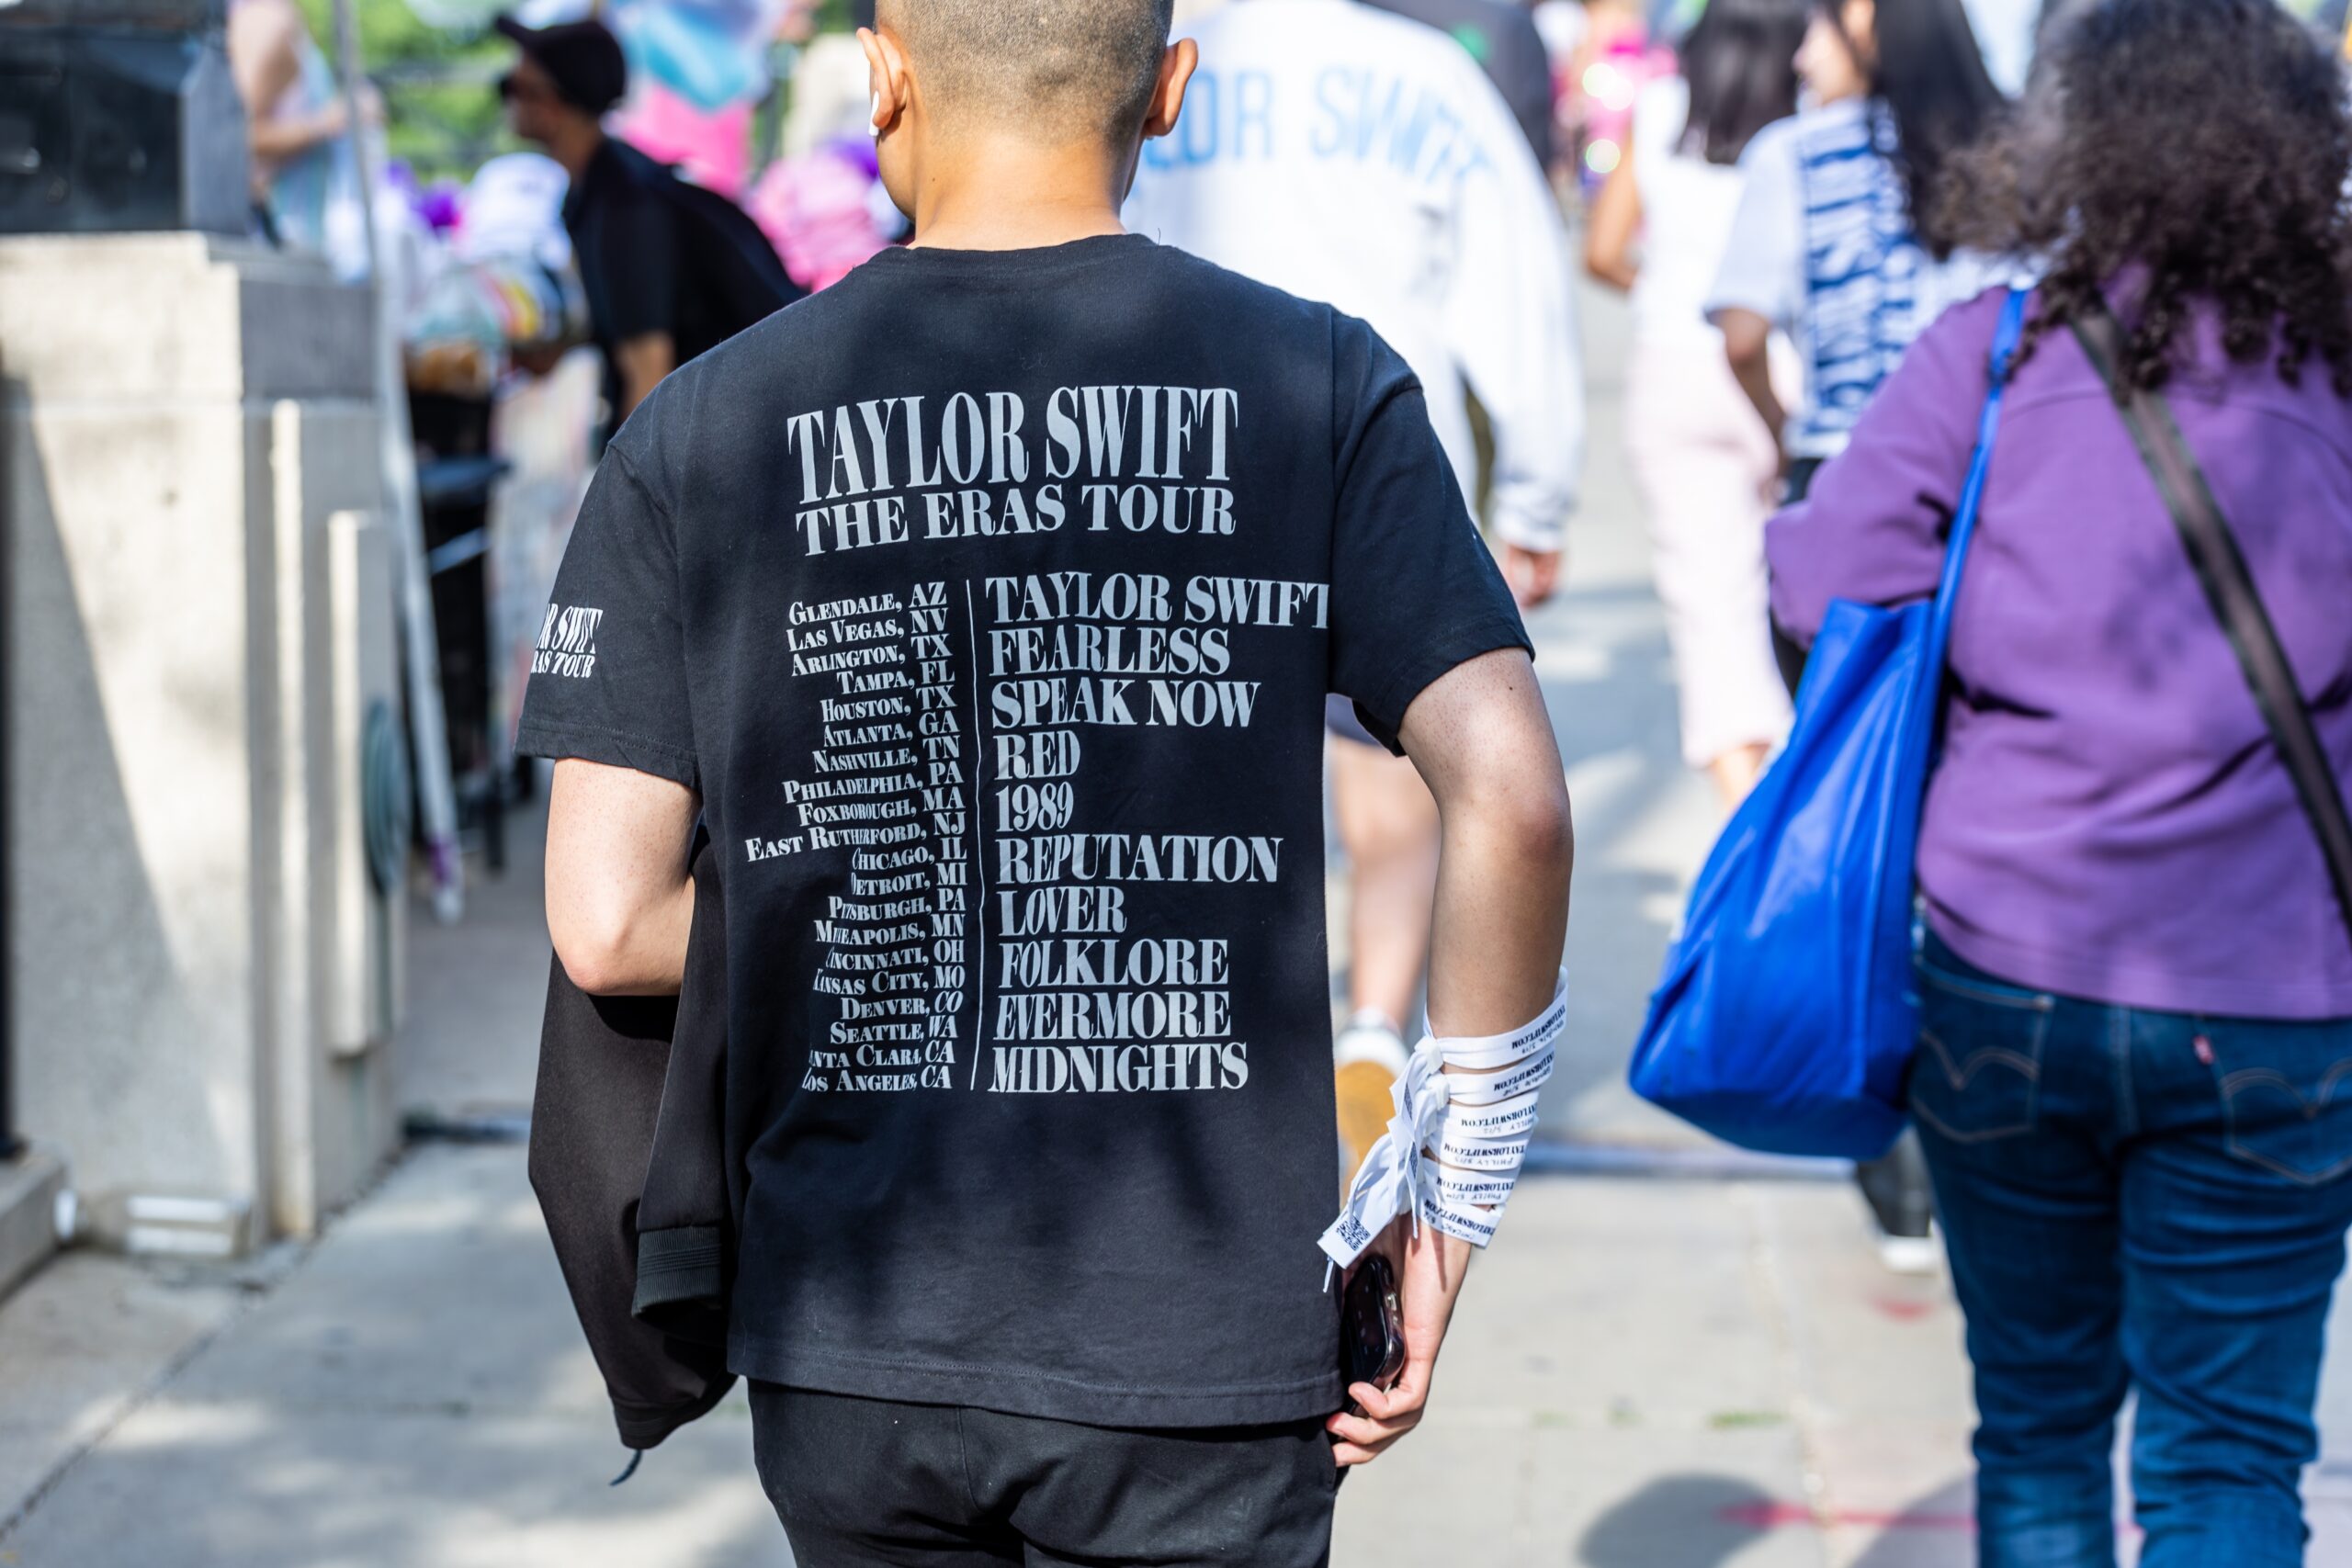 The Quest For Taylor Swift Tickets Is Ticket Scalping Illegal in